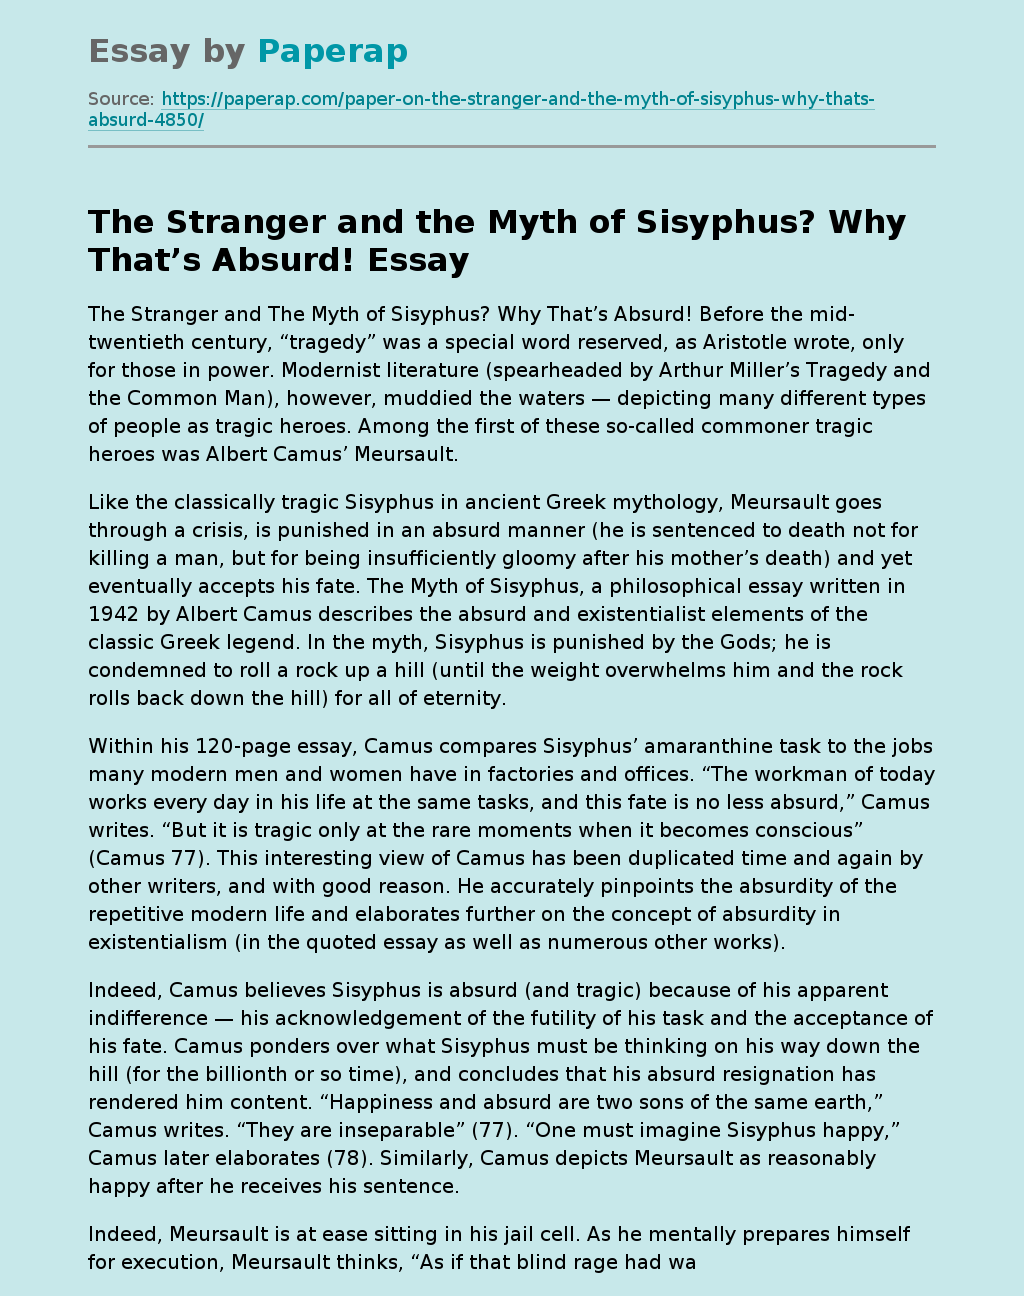 The Stranger and the Myth of Sisyphus? Why That’s Absurd!